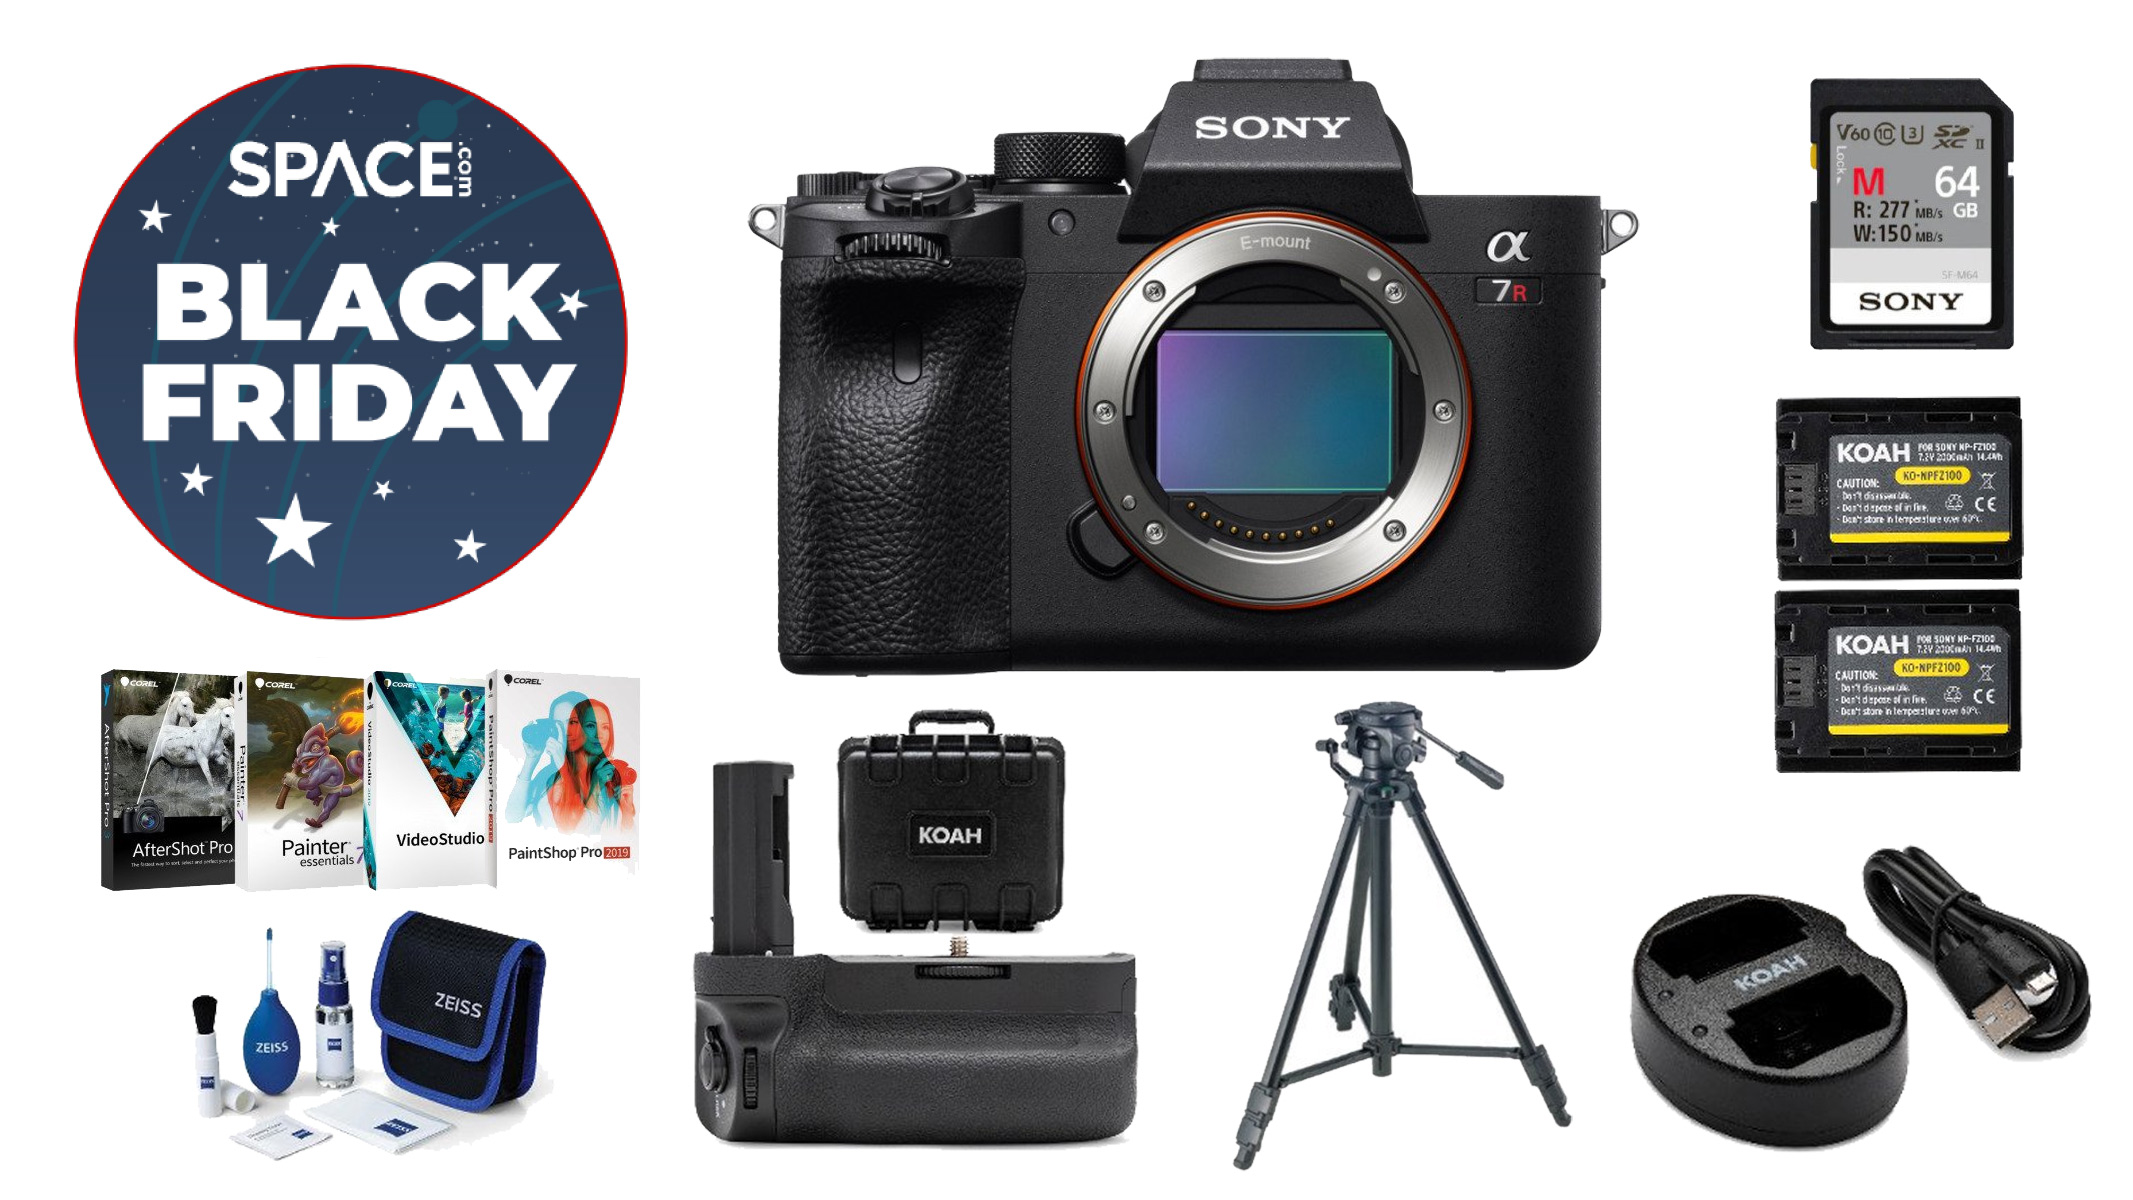 View of Sony A7R IVA accessory bundle on a white background with black friday deal badge